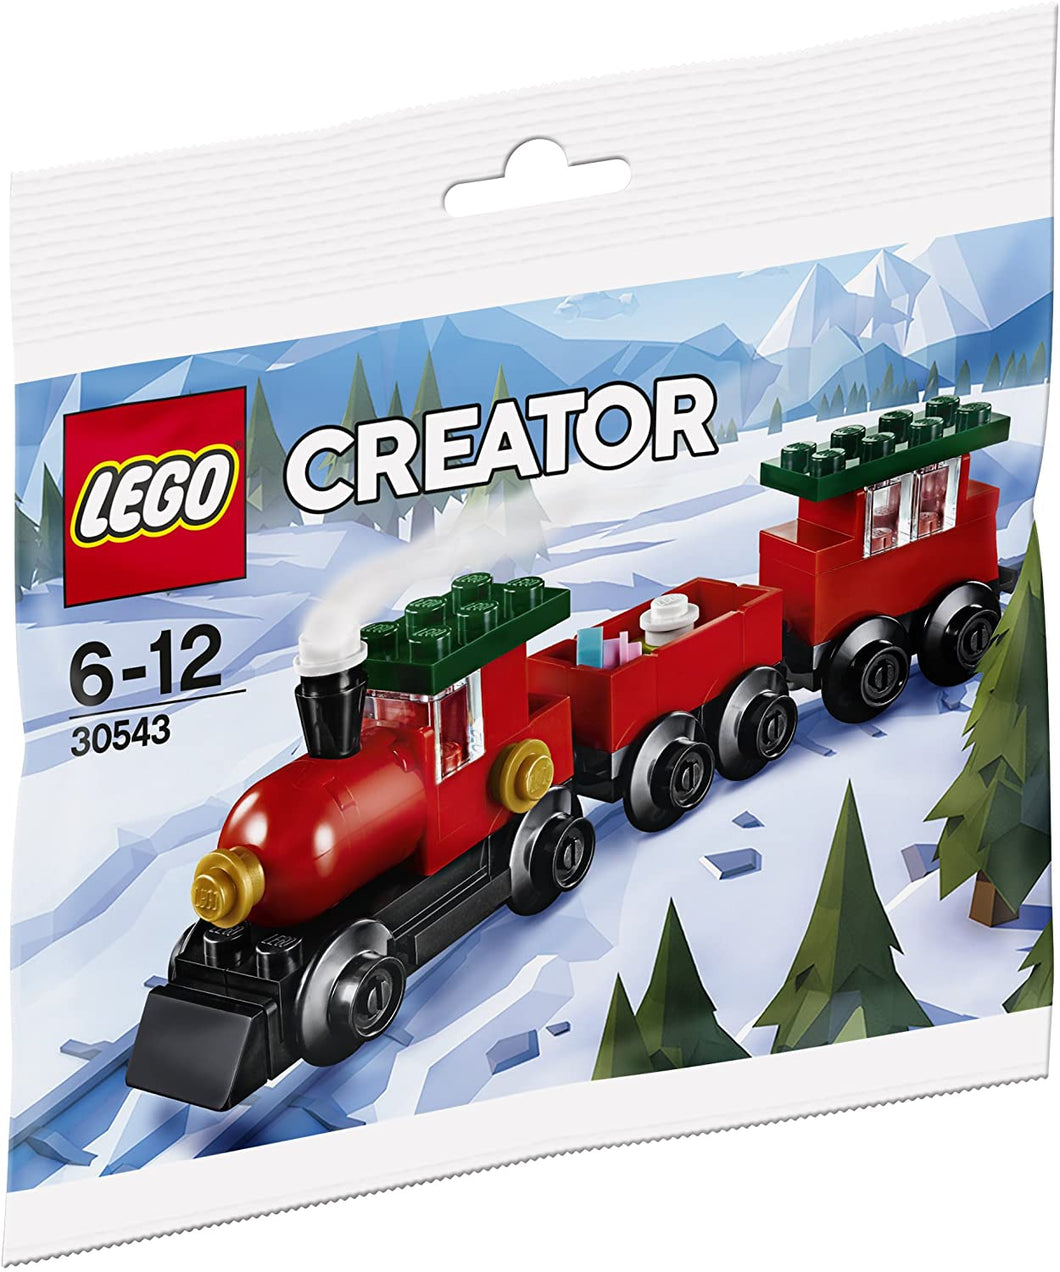 30543 Christmas Train polybag (Retired) (New Sealed)